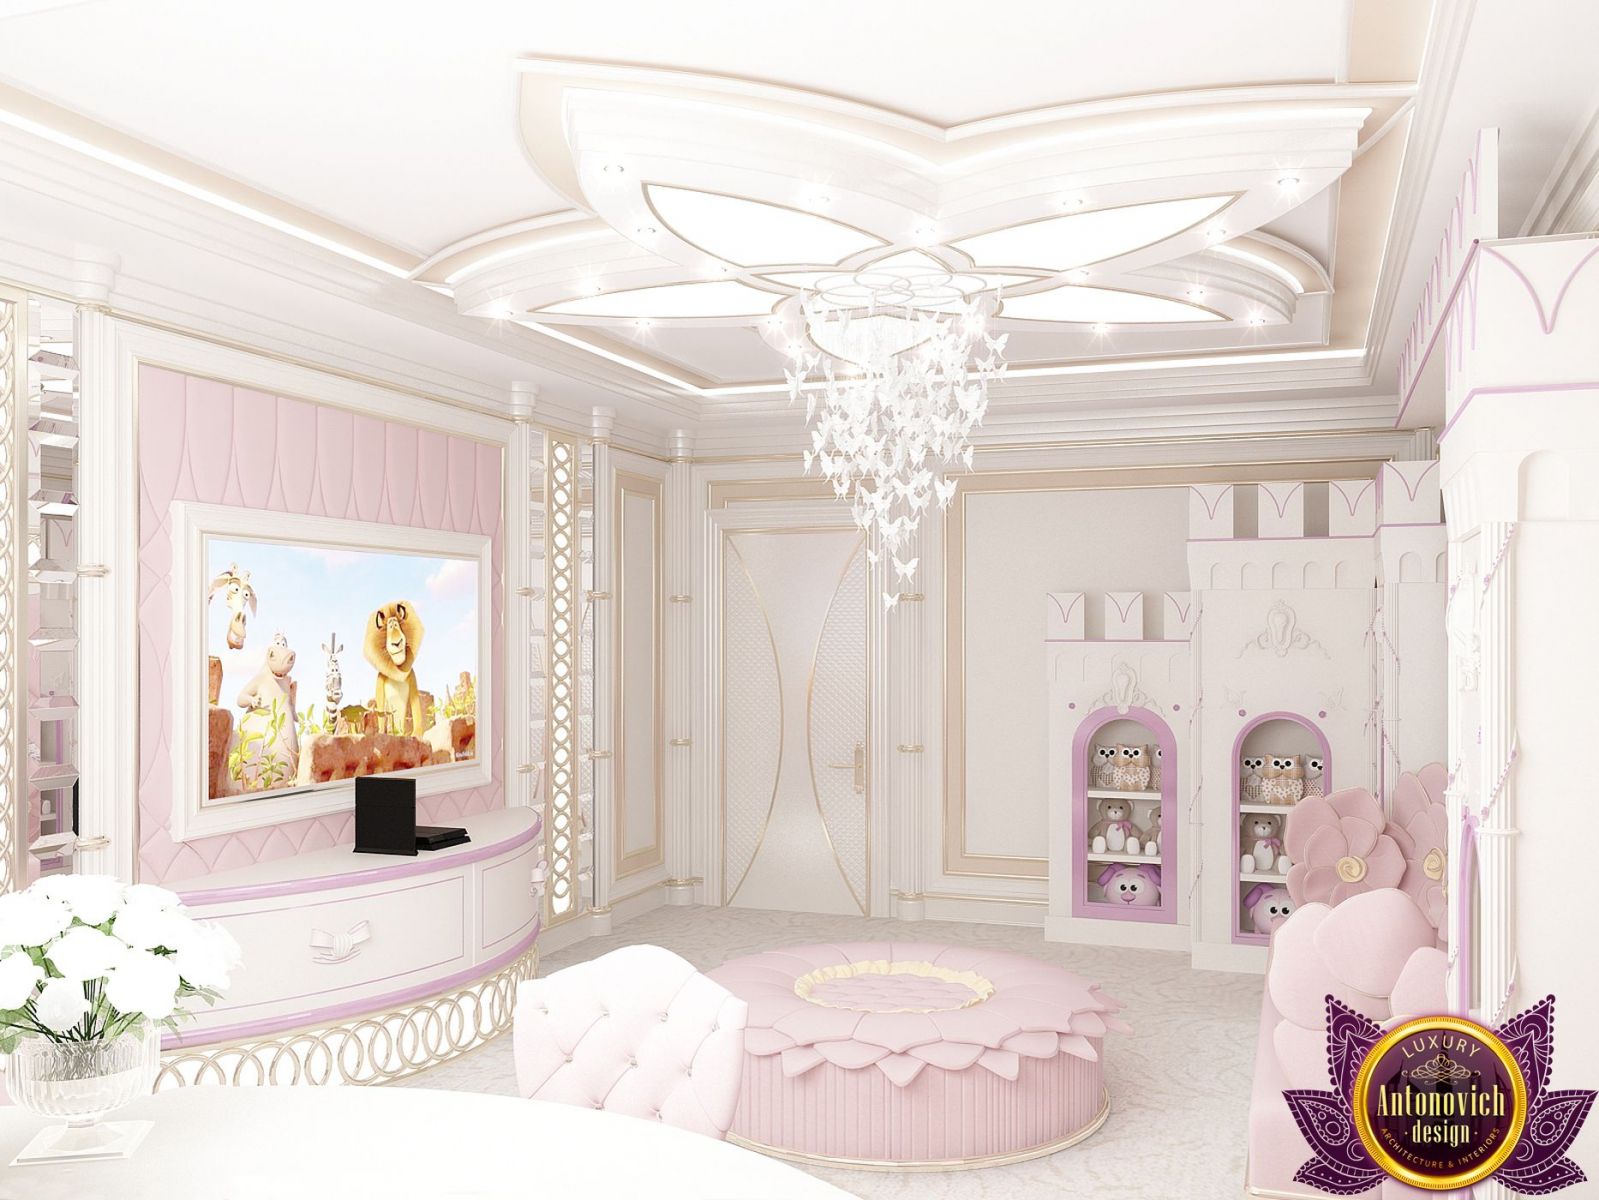 Dreamy girl's bedroom with a whimsical canopy